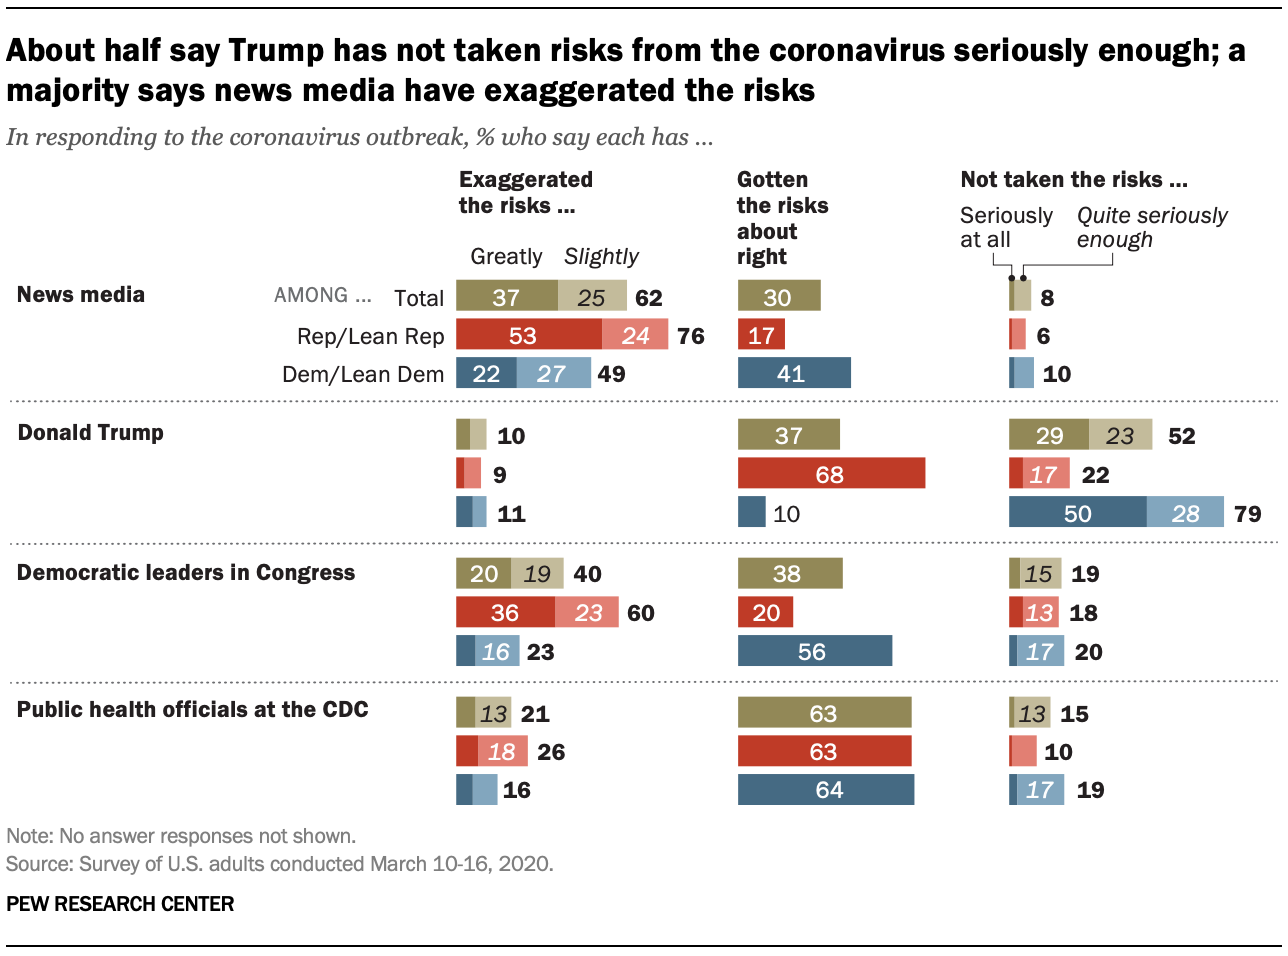 About half say Trump has not taken risks from the coronavirus seriously enough; a majority says news media have exaggerated the risks